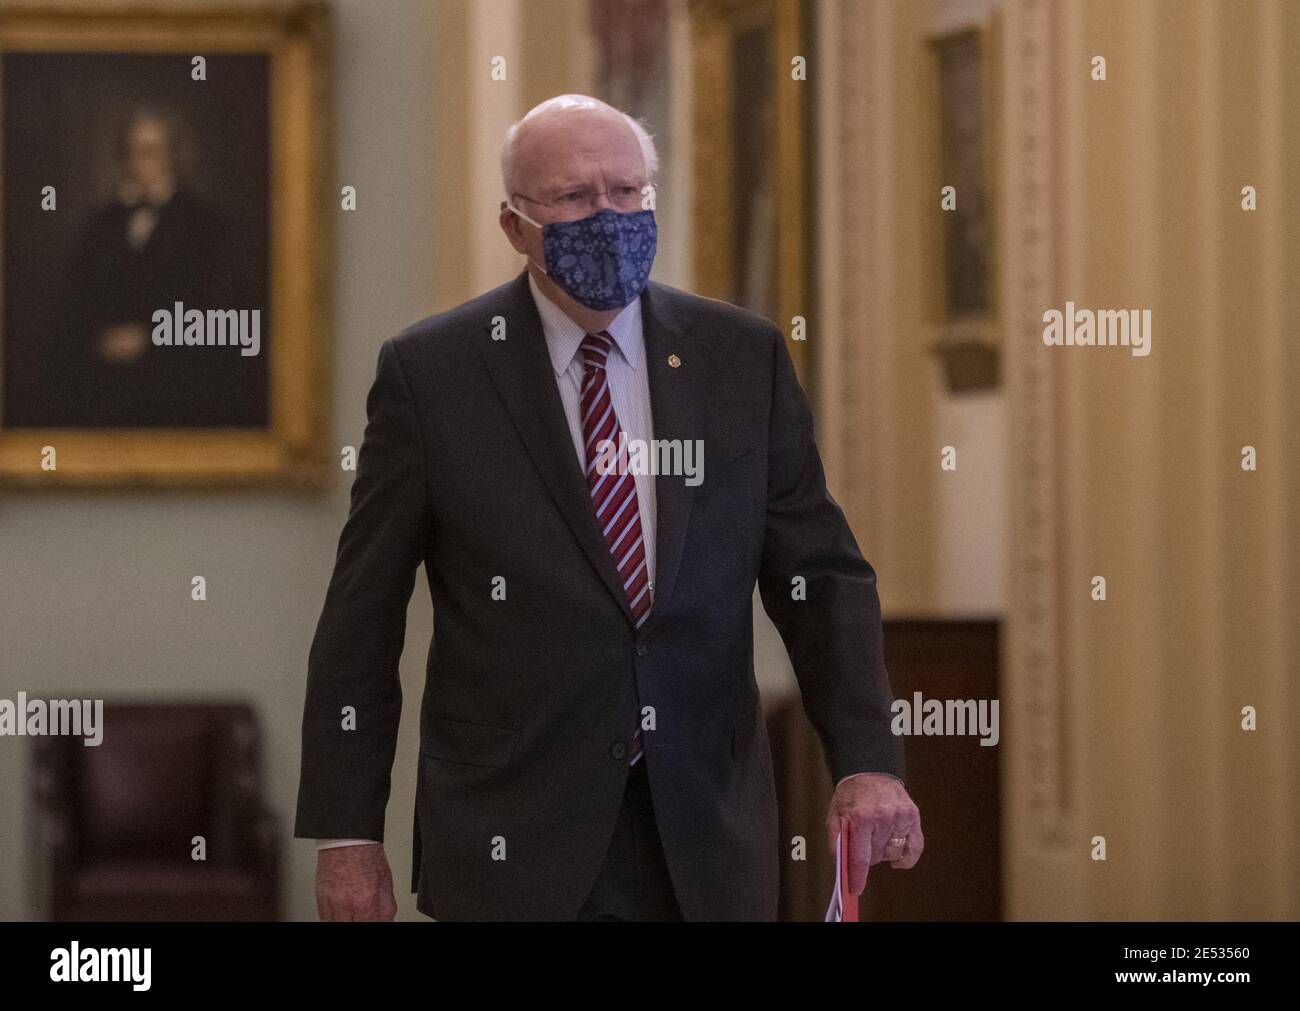 United States Senator Patrick Leahy (Democrat of Vermont) leaves the Senate chamber at the U.S. Capitol in Washington, DC, USA, Monday, January 25, 2021. Senator Leahy will preside over former President Trump's impeachment trial. Photo by Rod Lamkey/CNP/ABACAPRESS.COM Stock Photo